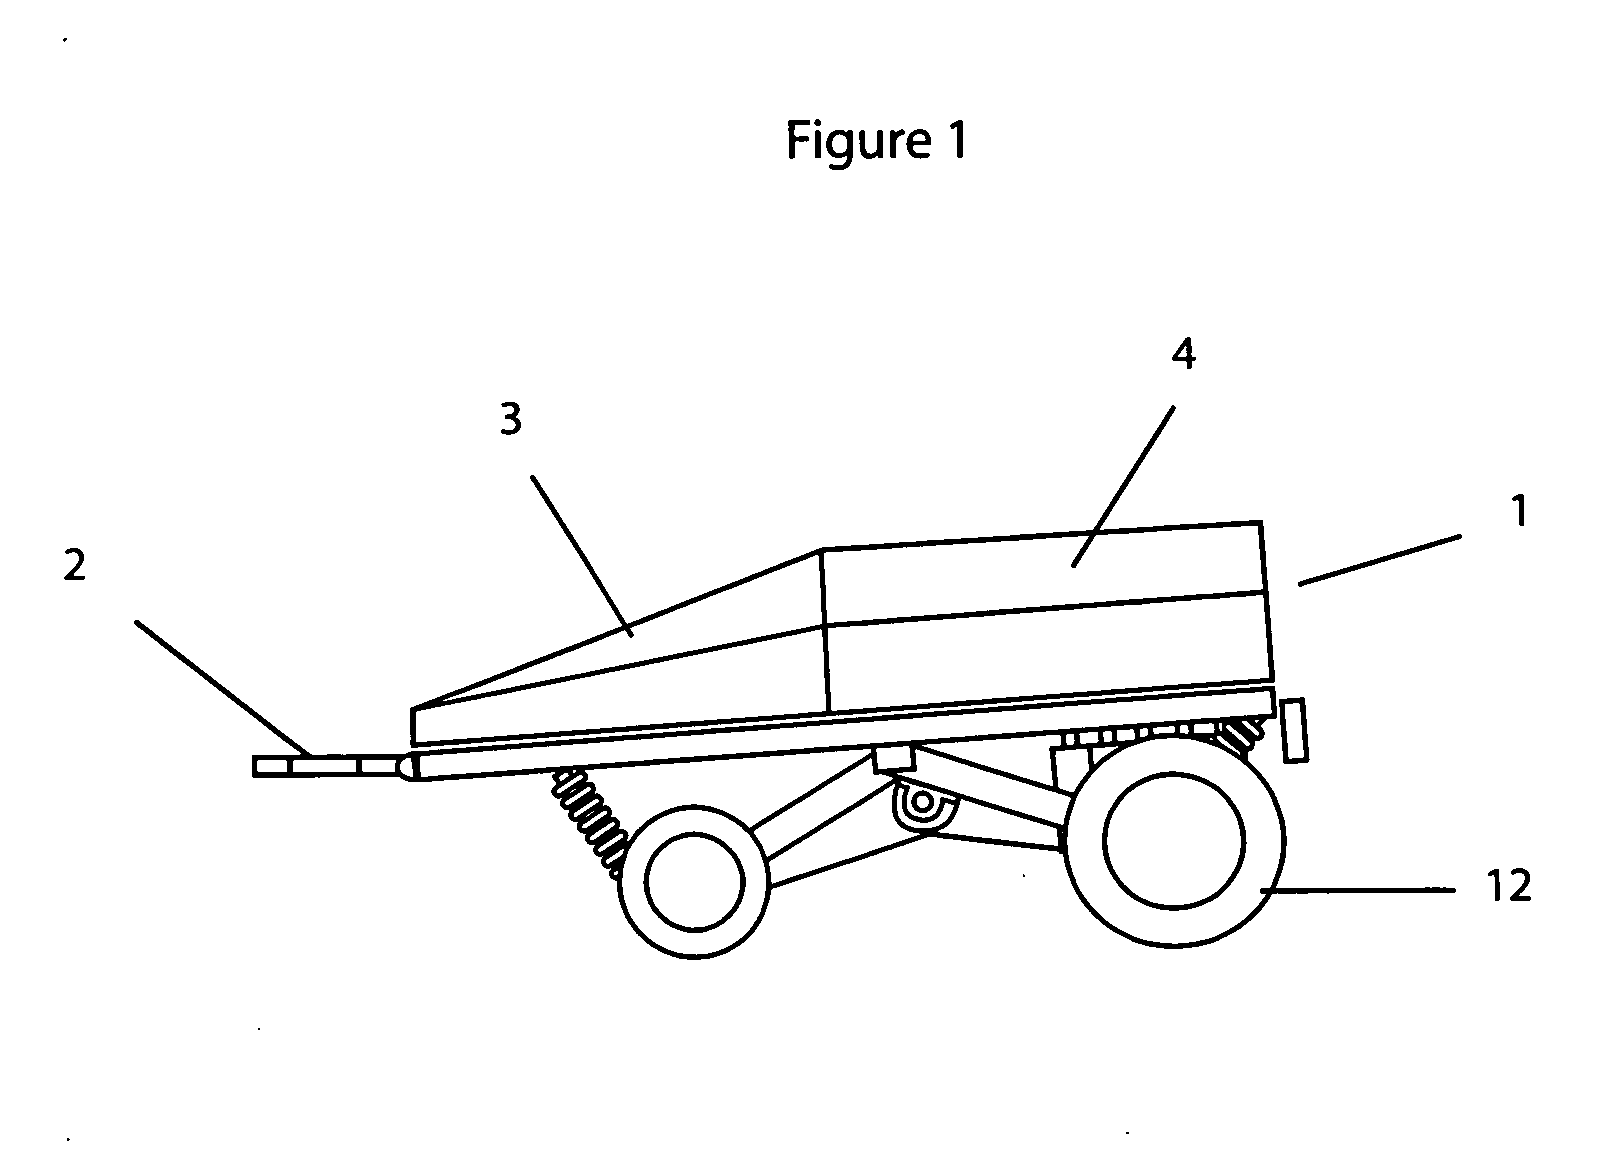 Dynamic friction testing vehicle to measure fluid drag and rolling friction